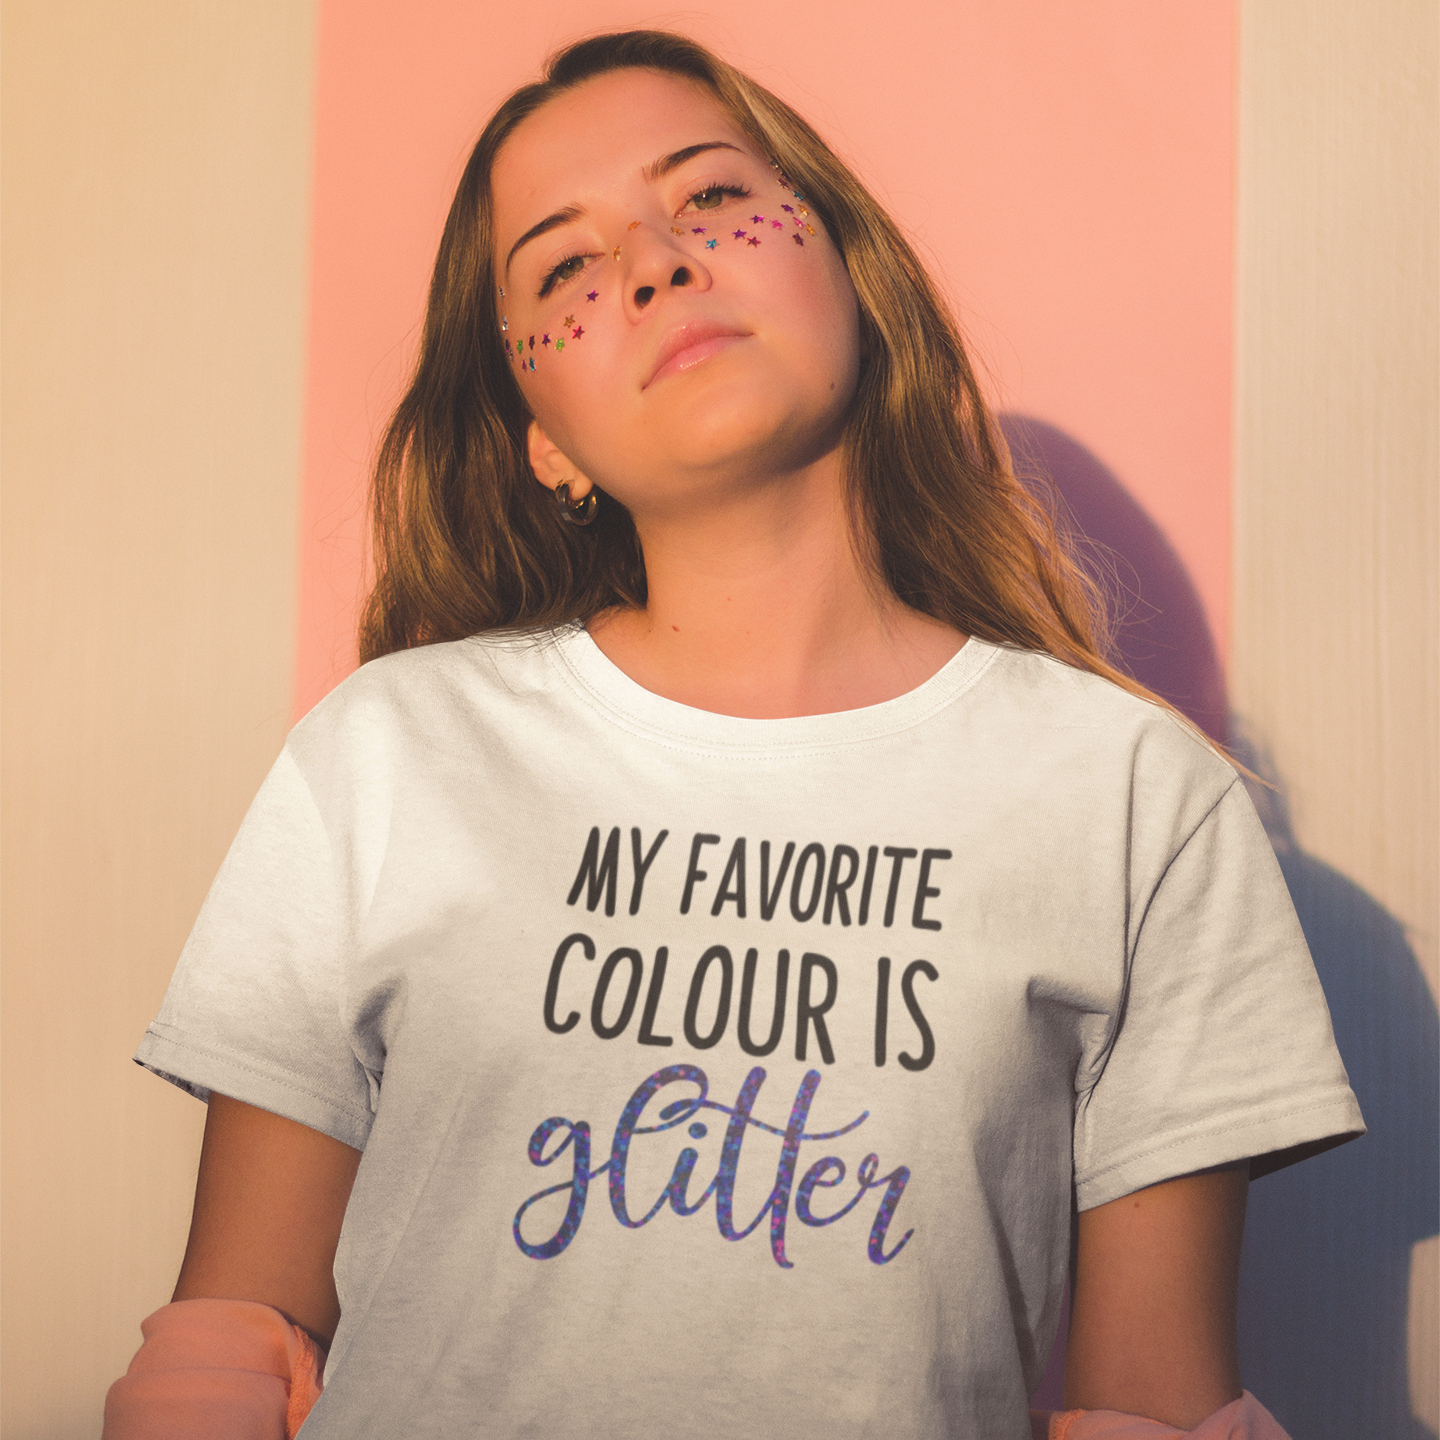 'My favorite colour is glitter' adult shirt